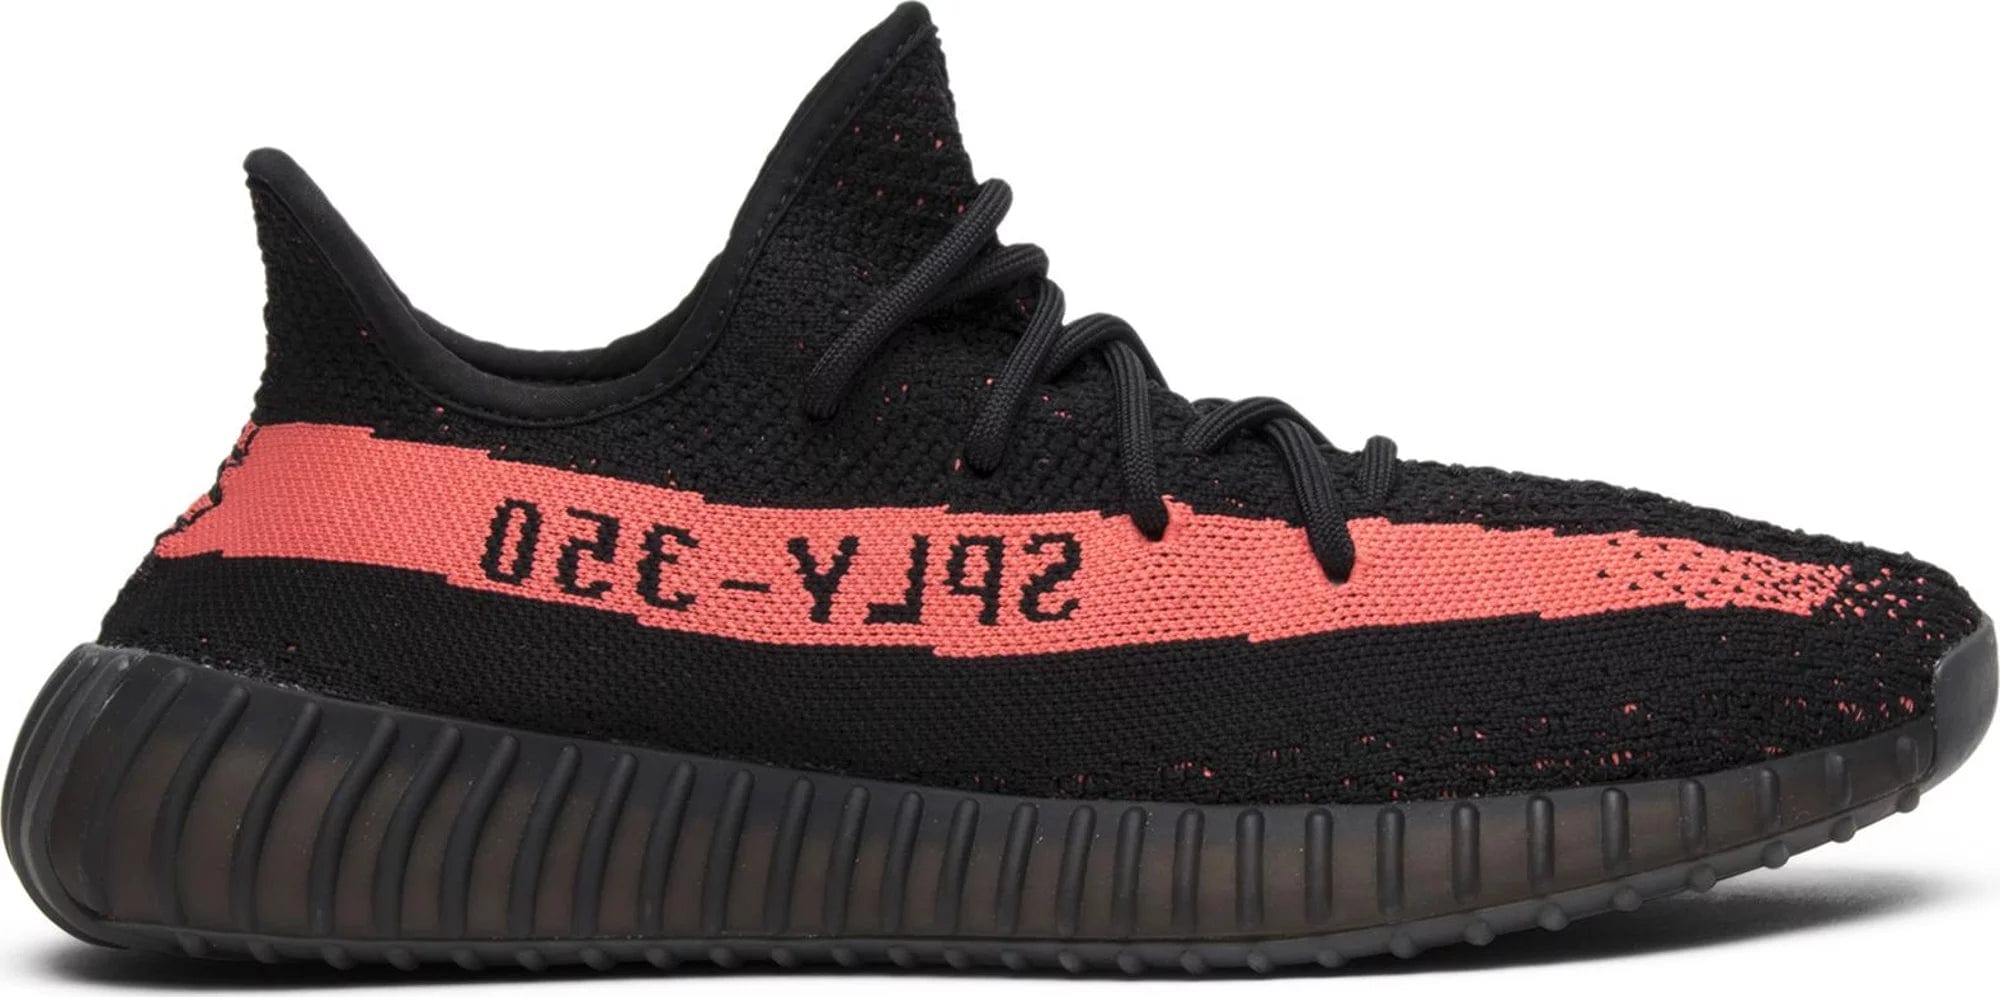 sneakers adidas Yeezy Boost 350 V2 Core Black Red